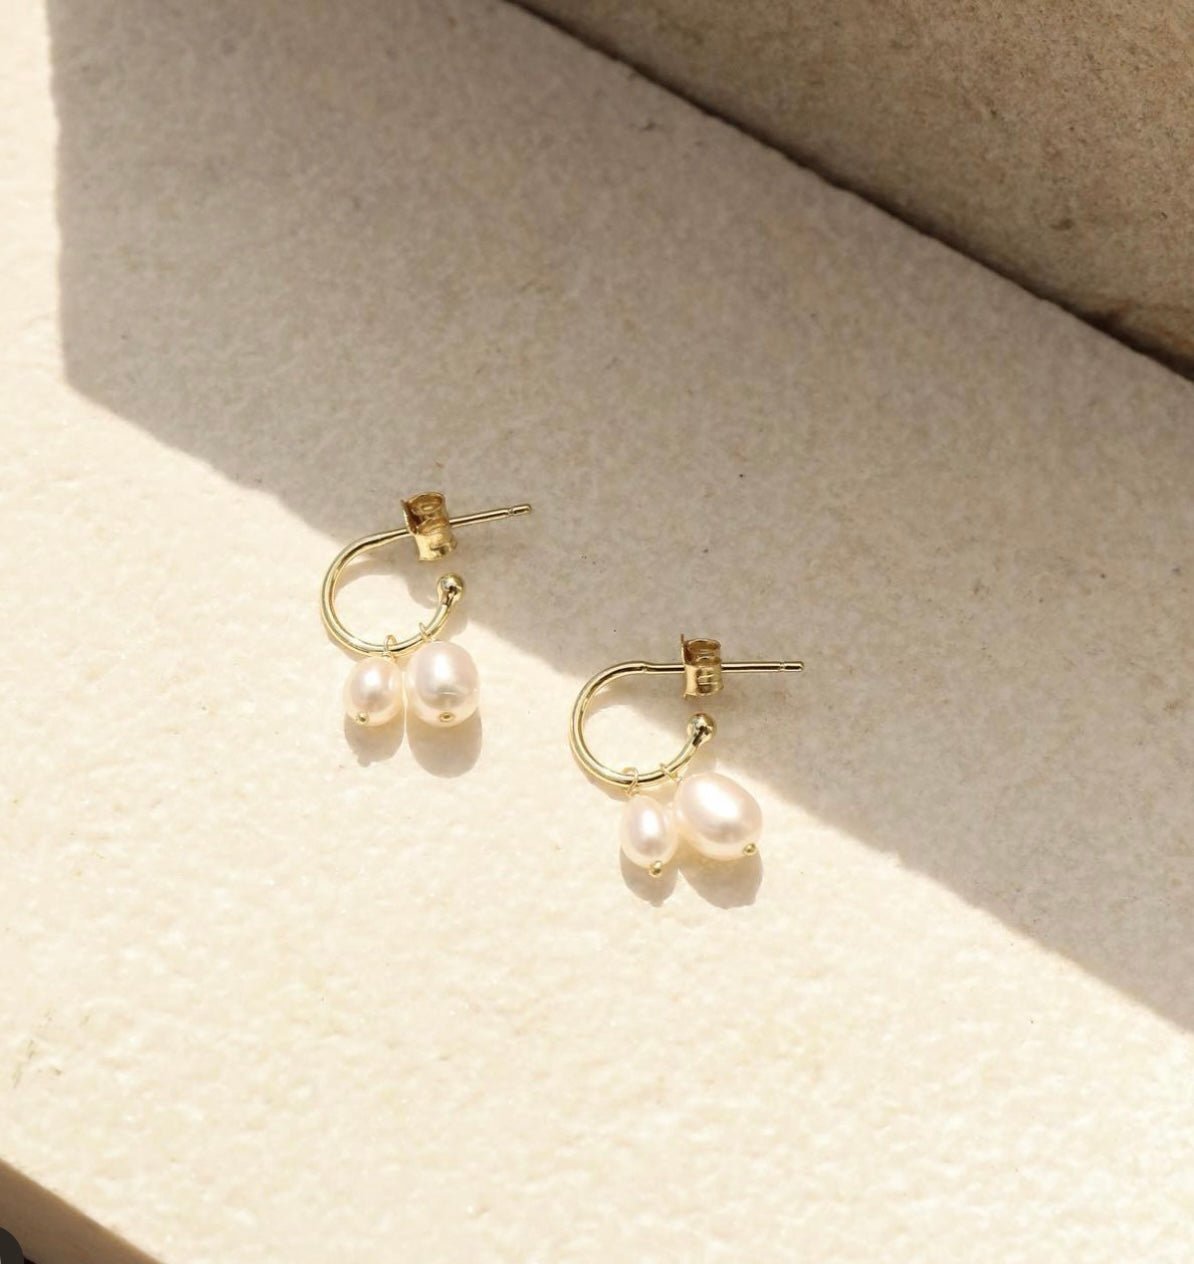 Shop Island Earrings with Freshwater Pearls by Bianc - Bianc